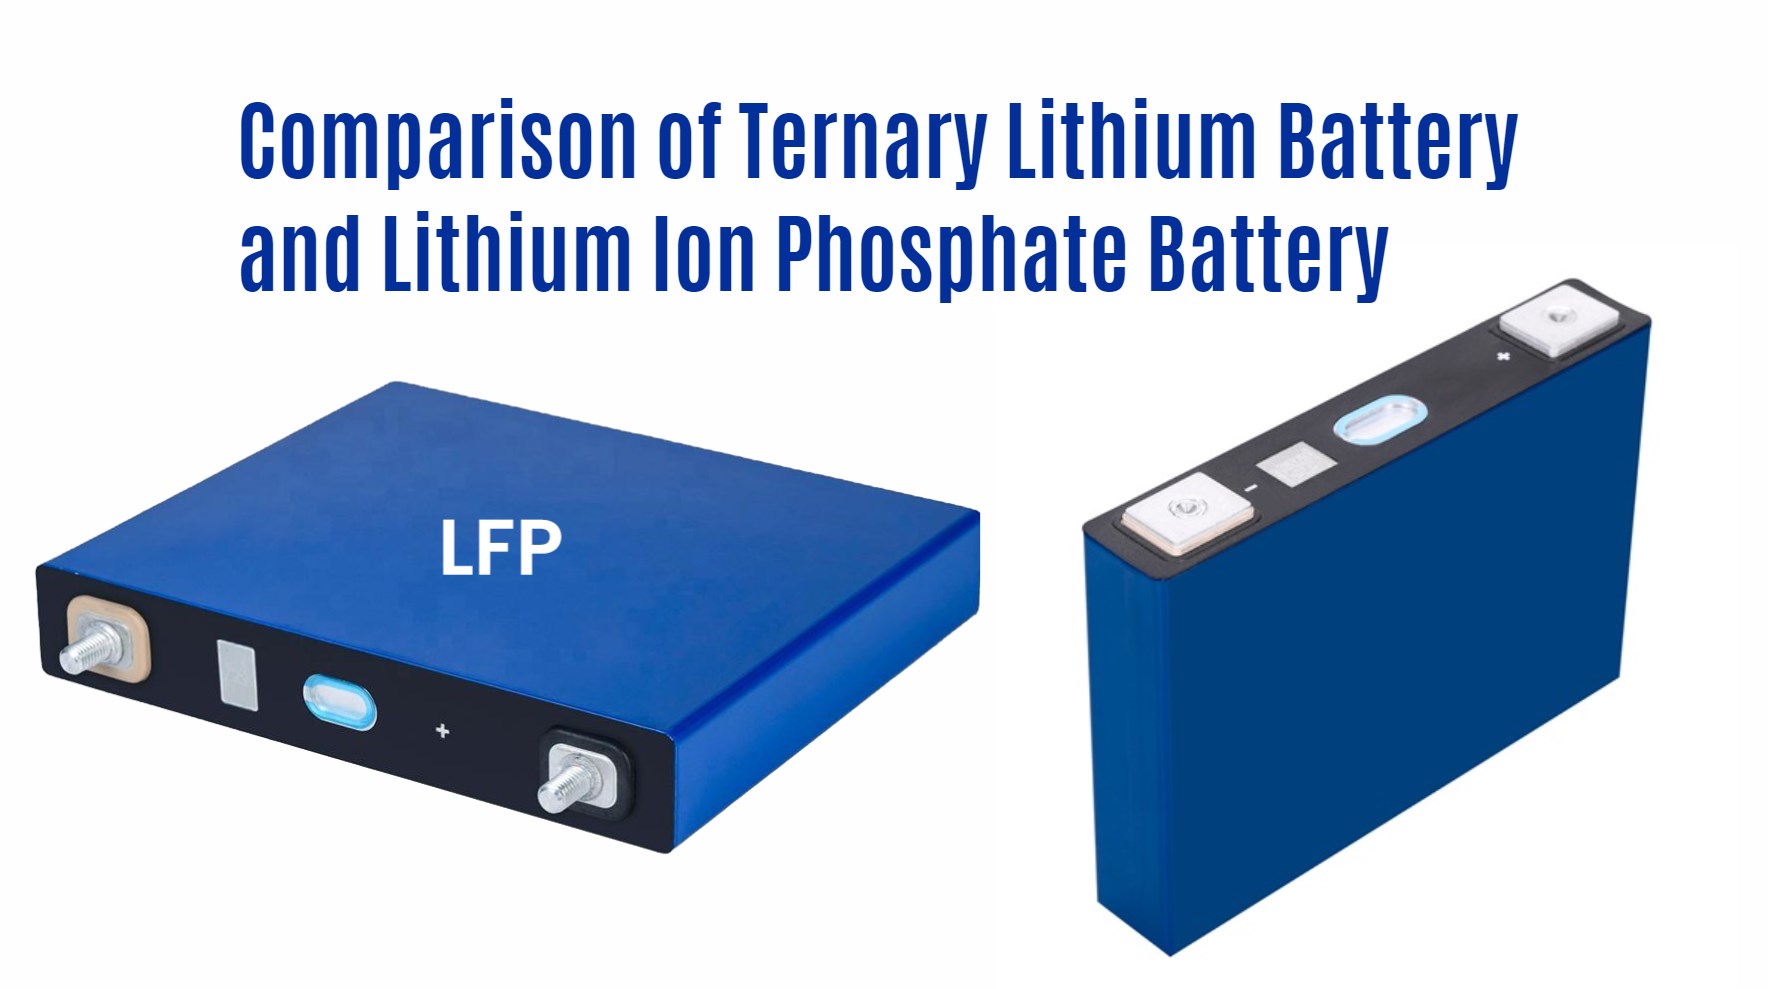 Comparison of Ternary Lithium Battery and Lithium Ion Phosphate Battery